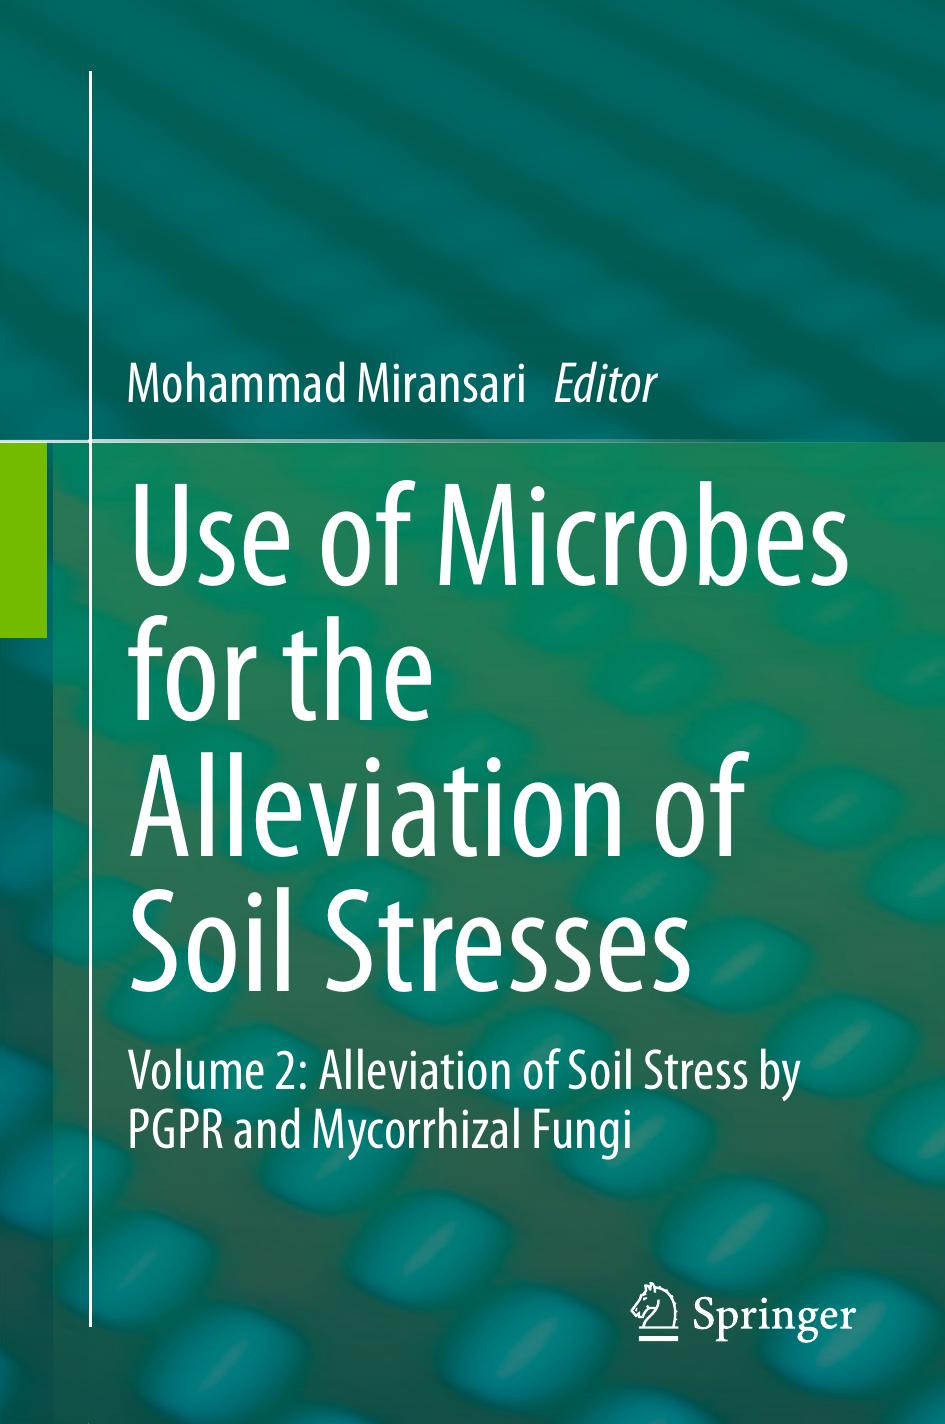 Use of Microbes for the Alleviation of Soil Stresses  Volume 2  Alleviation of Soil Stress by PGPR and Mycorrhizal Fungi ( PDFDrive ), 2014